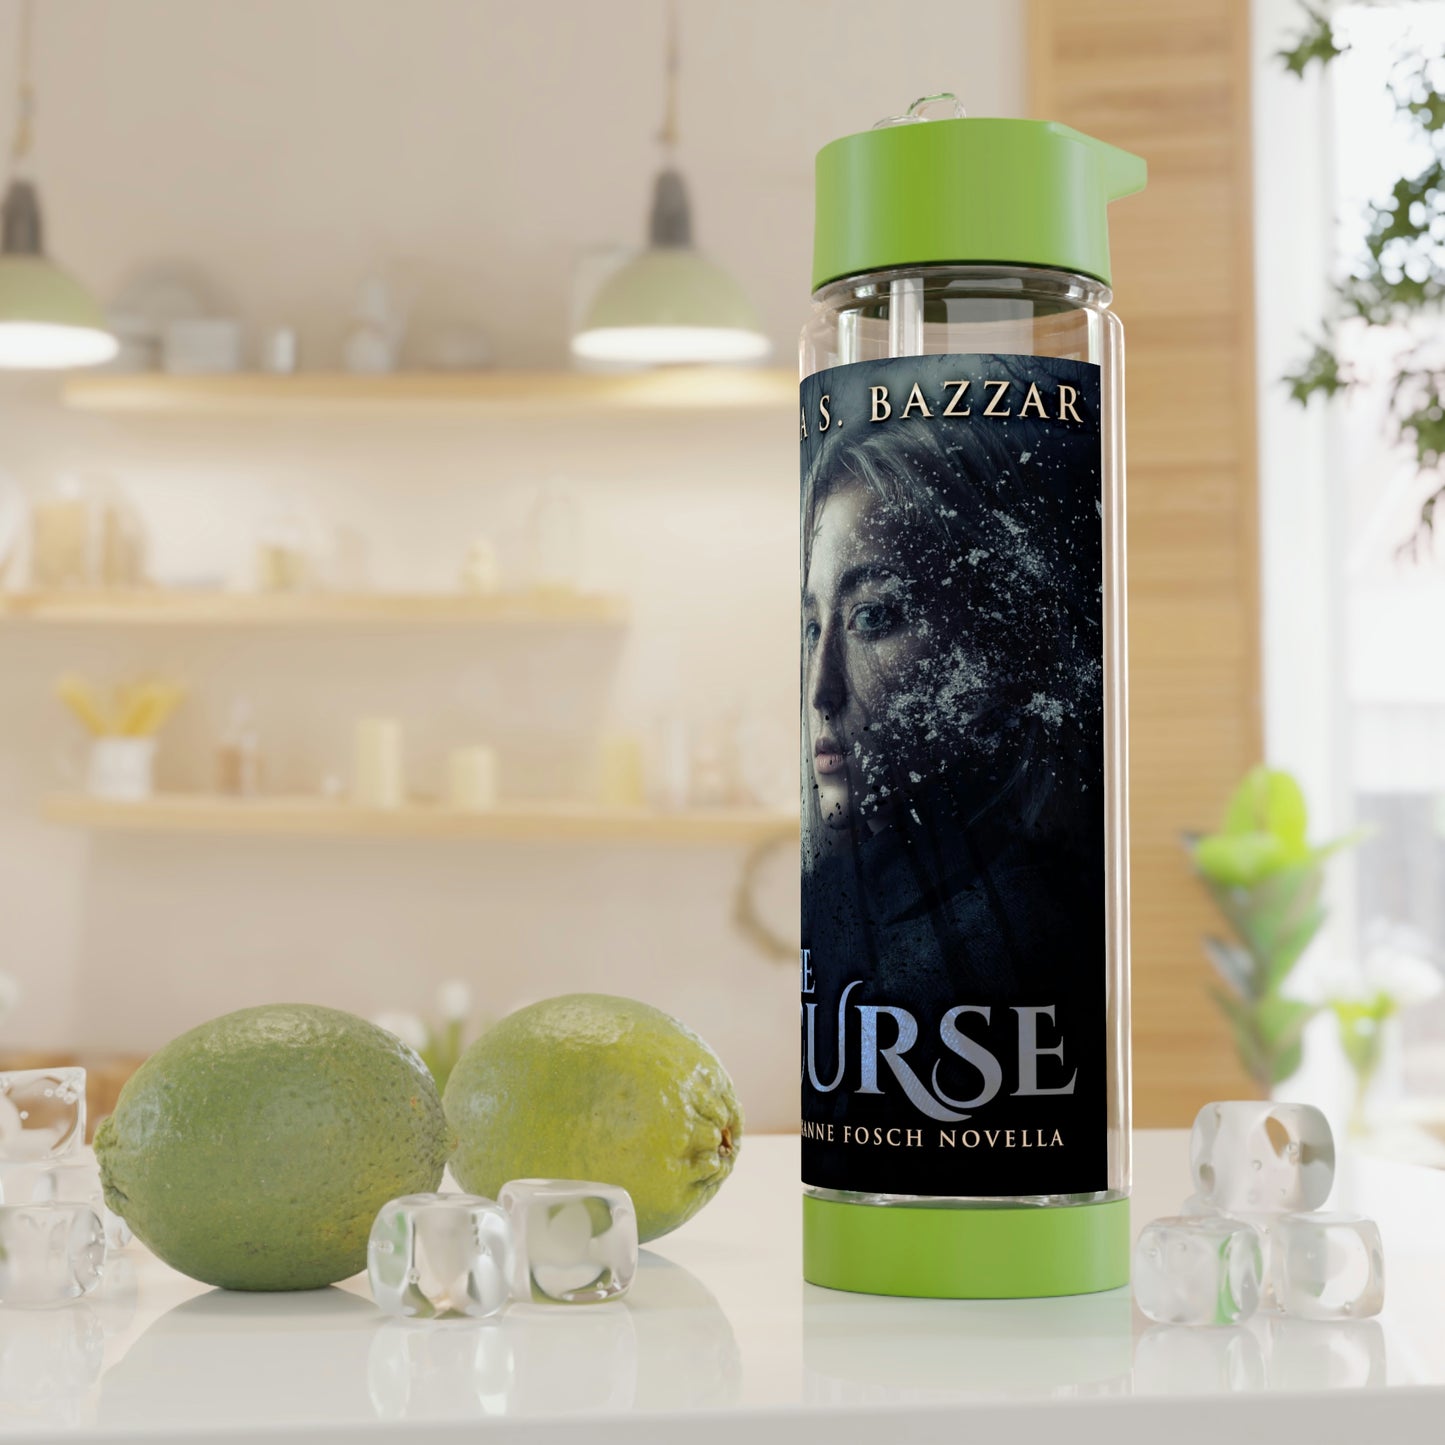 The Curse - Infuser Water Bottle